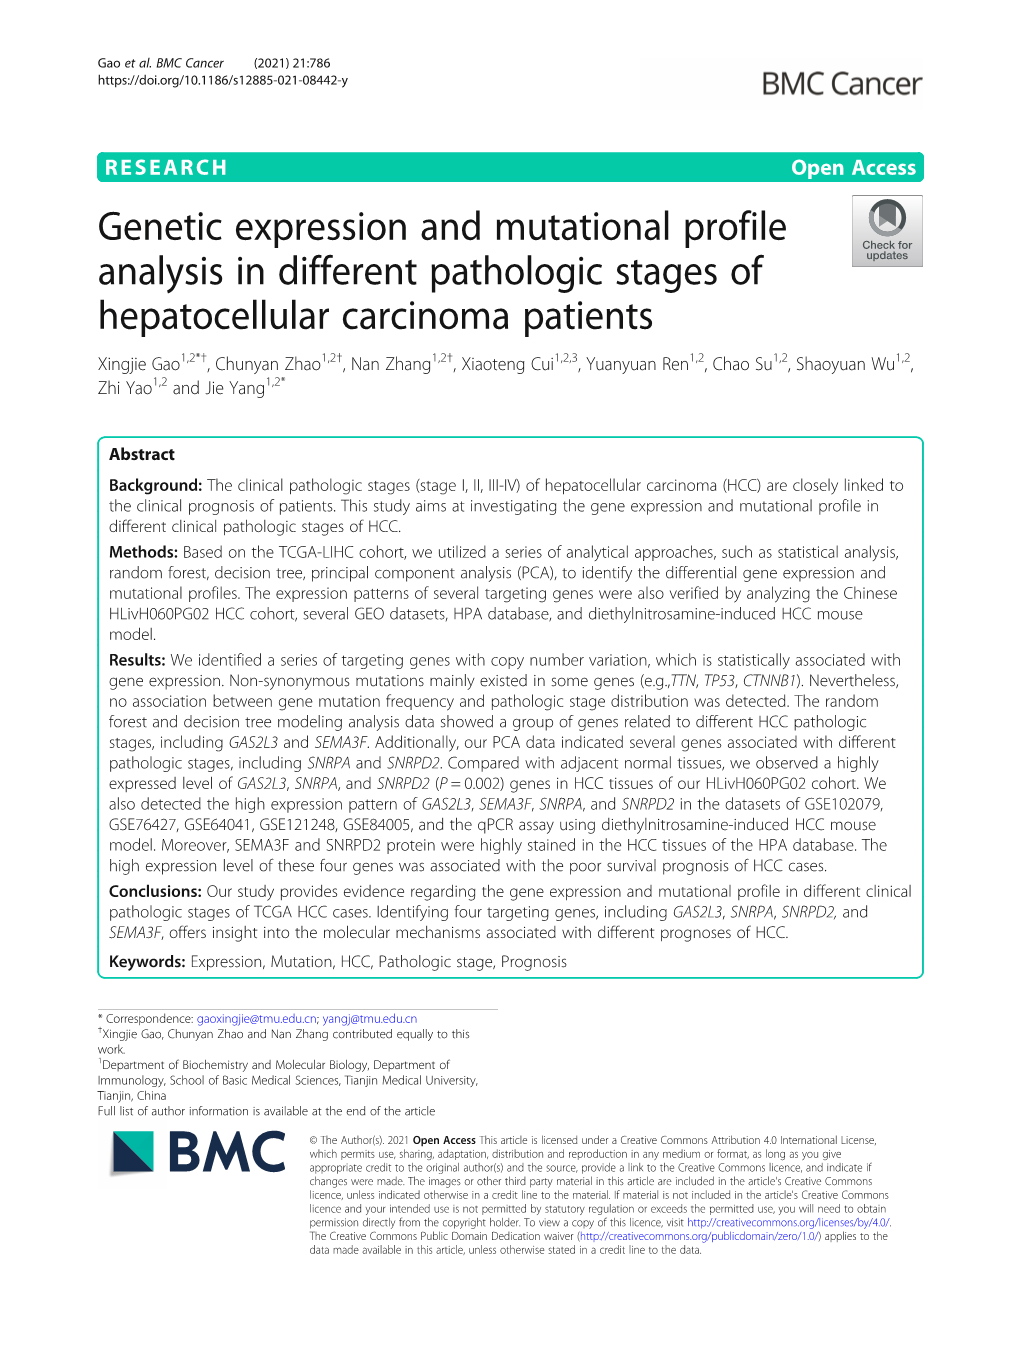 Genetic Expression and Mutational Profile Analysis in Different